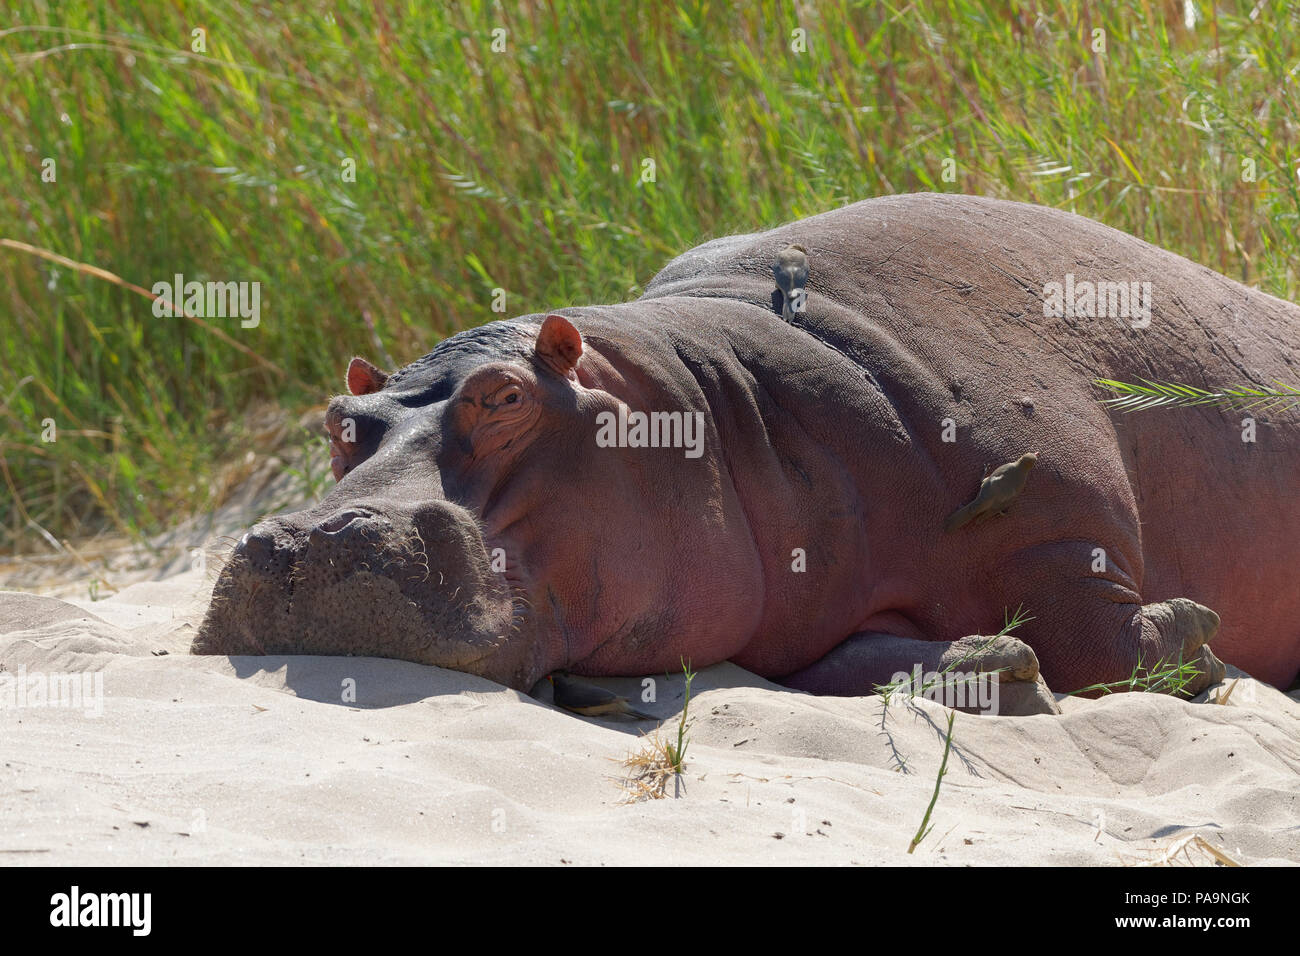 Hippopotamus (Hippopotamus amphibius) sleeping on the riverbanks of Olifants River with red-billed oxpeckers, Kruger National Park, South Africa Stock Photo